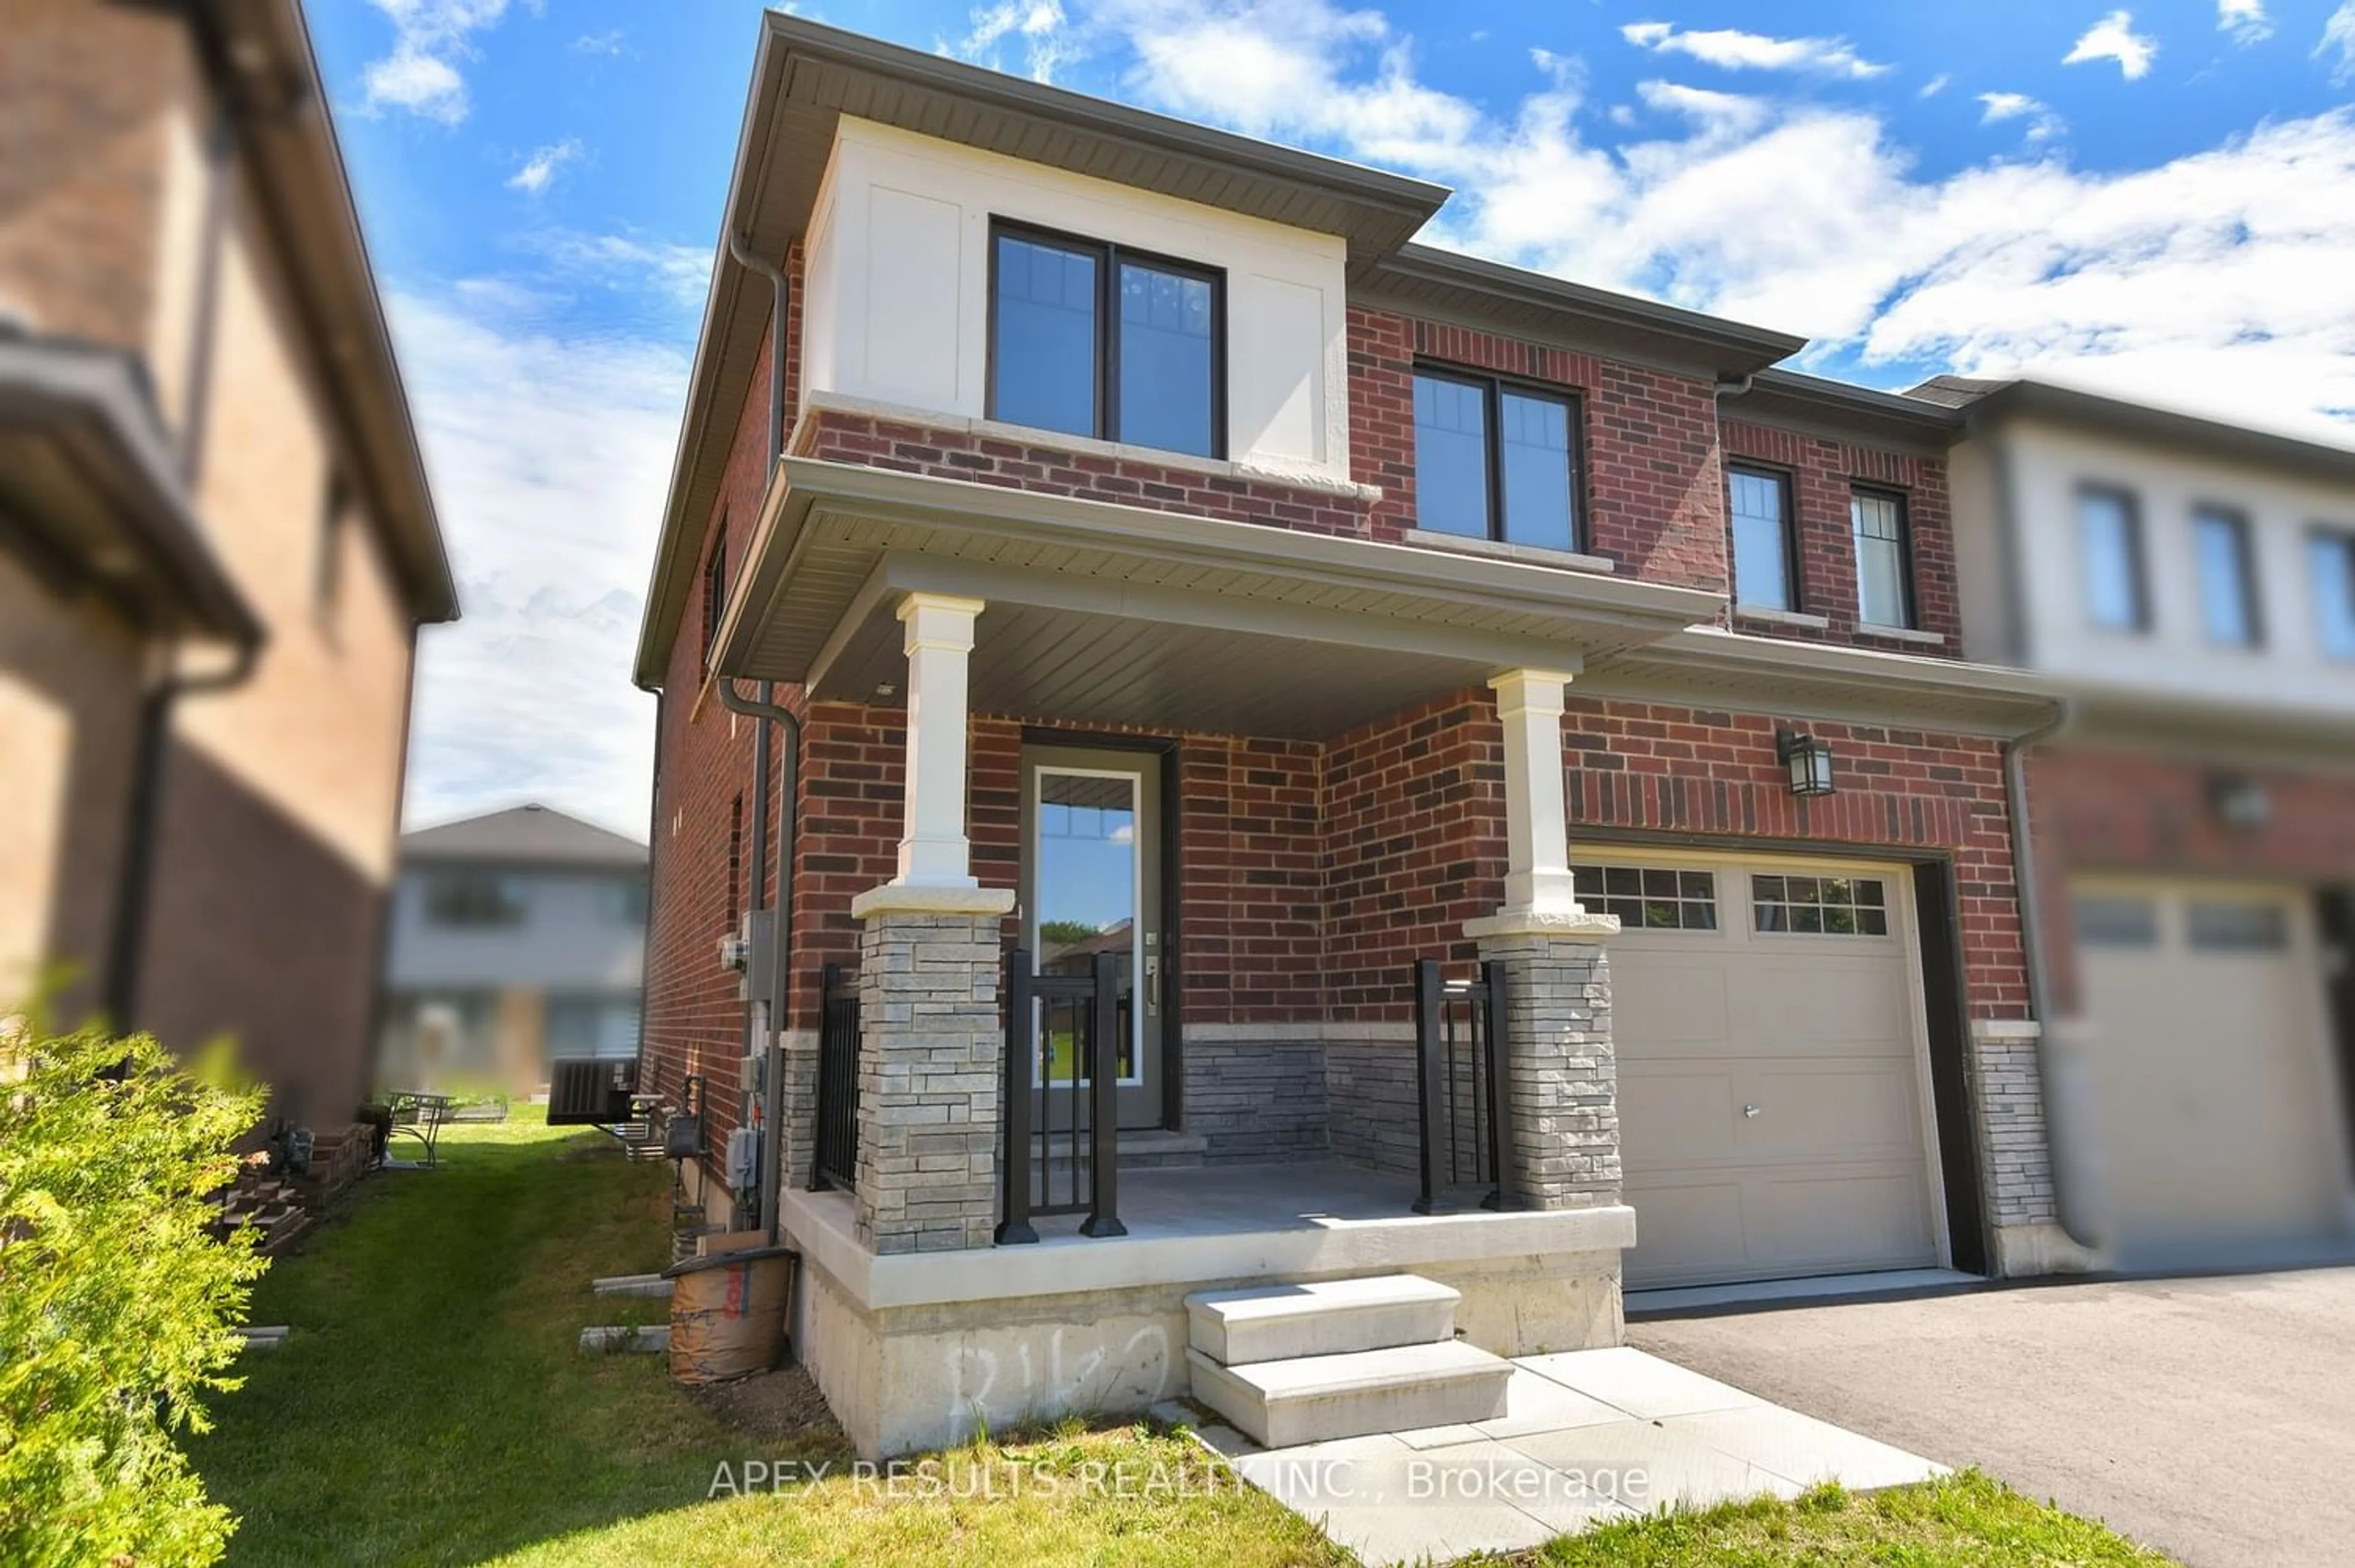 Home with brick exterior material for 304 Bedrock Dr, Hamilton Ontario L8J 0M4